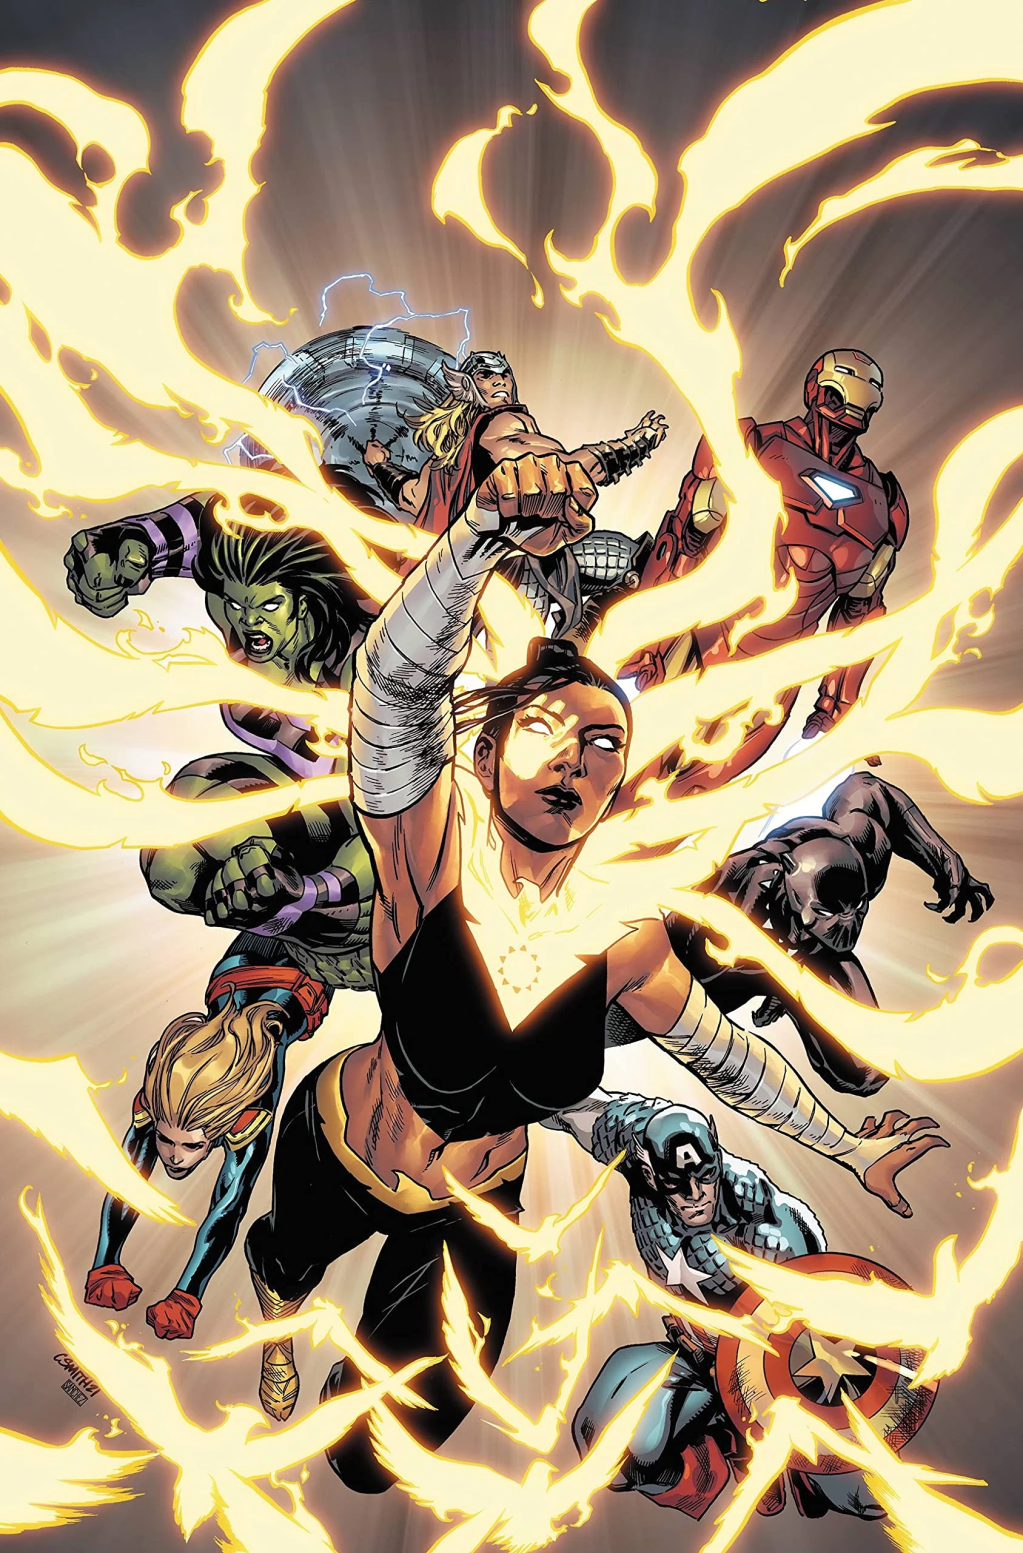 A Phoenix-fueled Echo leads the Avengers into battle on Cory Smith's cover to Phoenix: Echo Song Vol. 1 #1 (2021), Marvel Comics